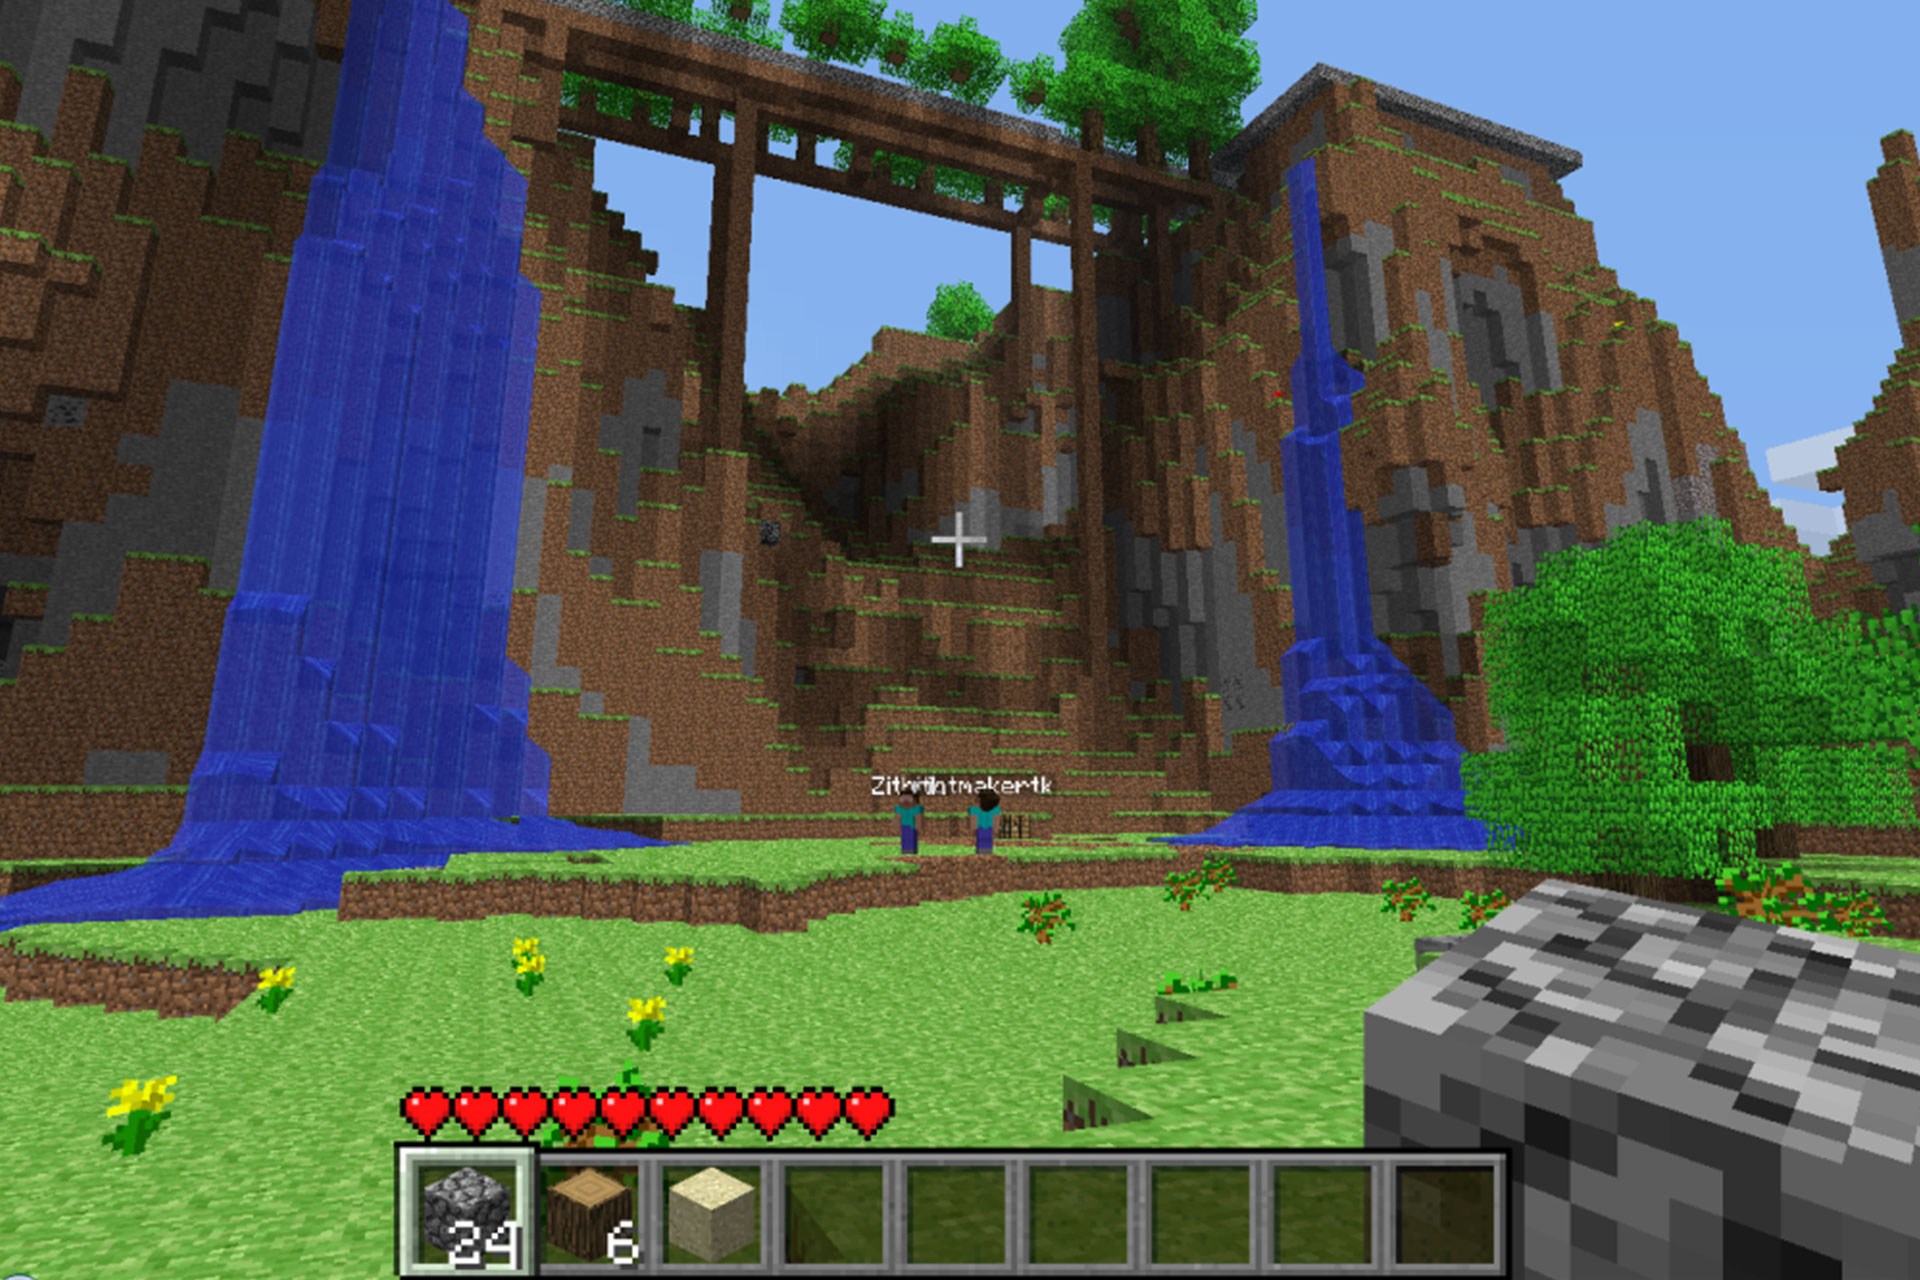 Download Minecraft 1.7.9 for Mac, Windows, Linux